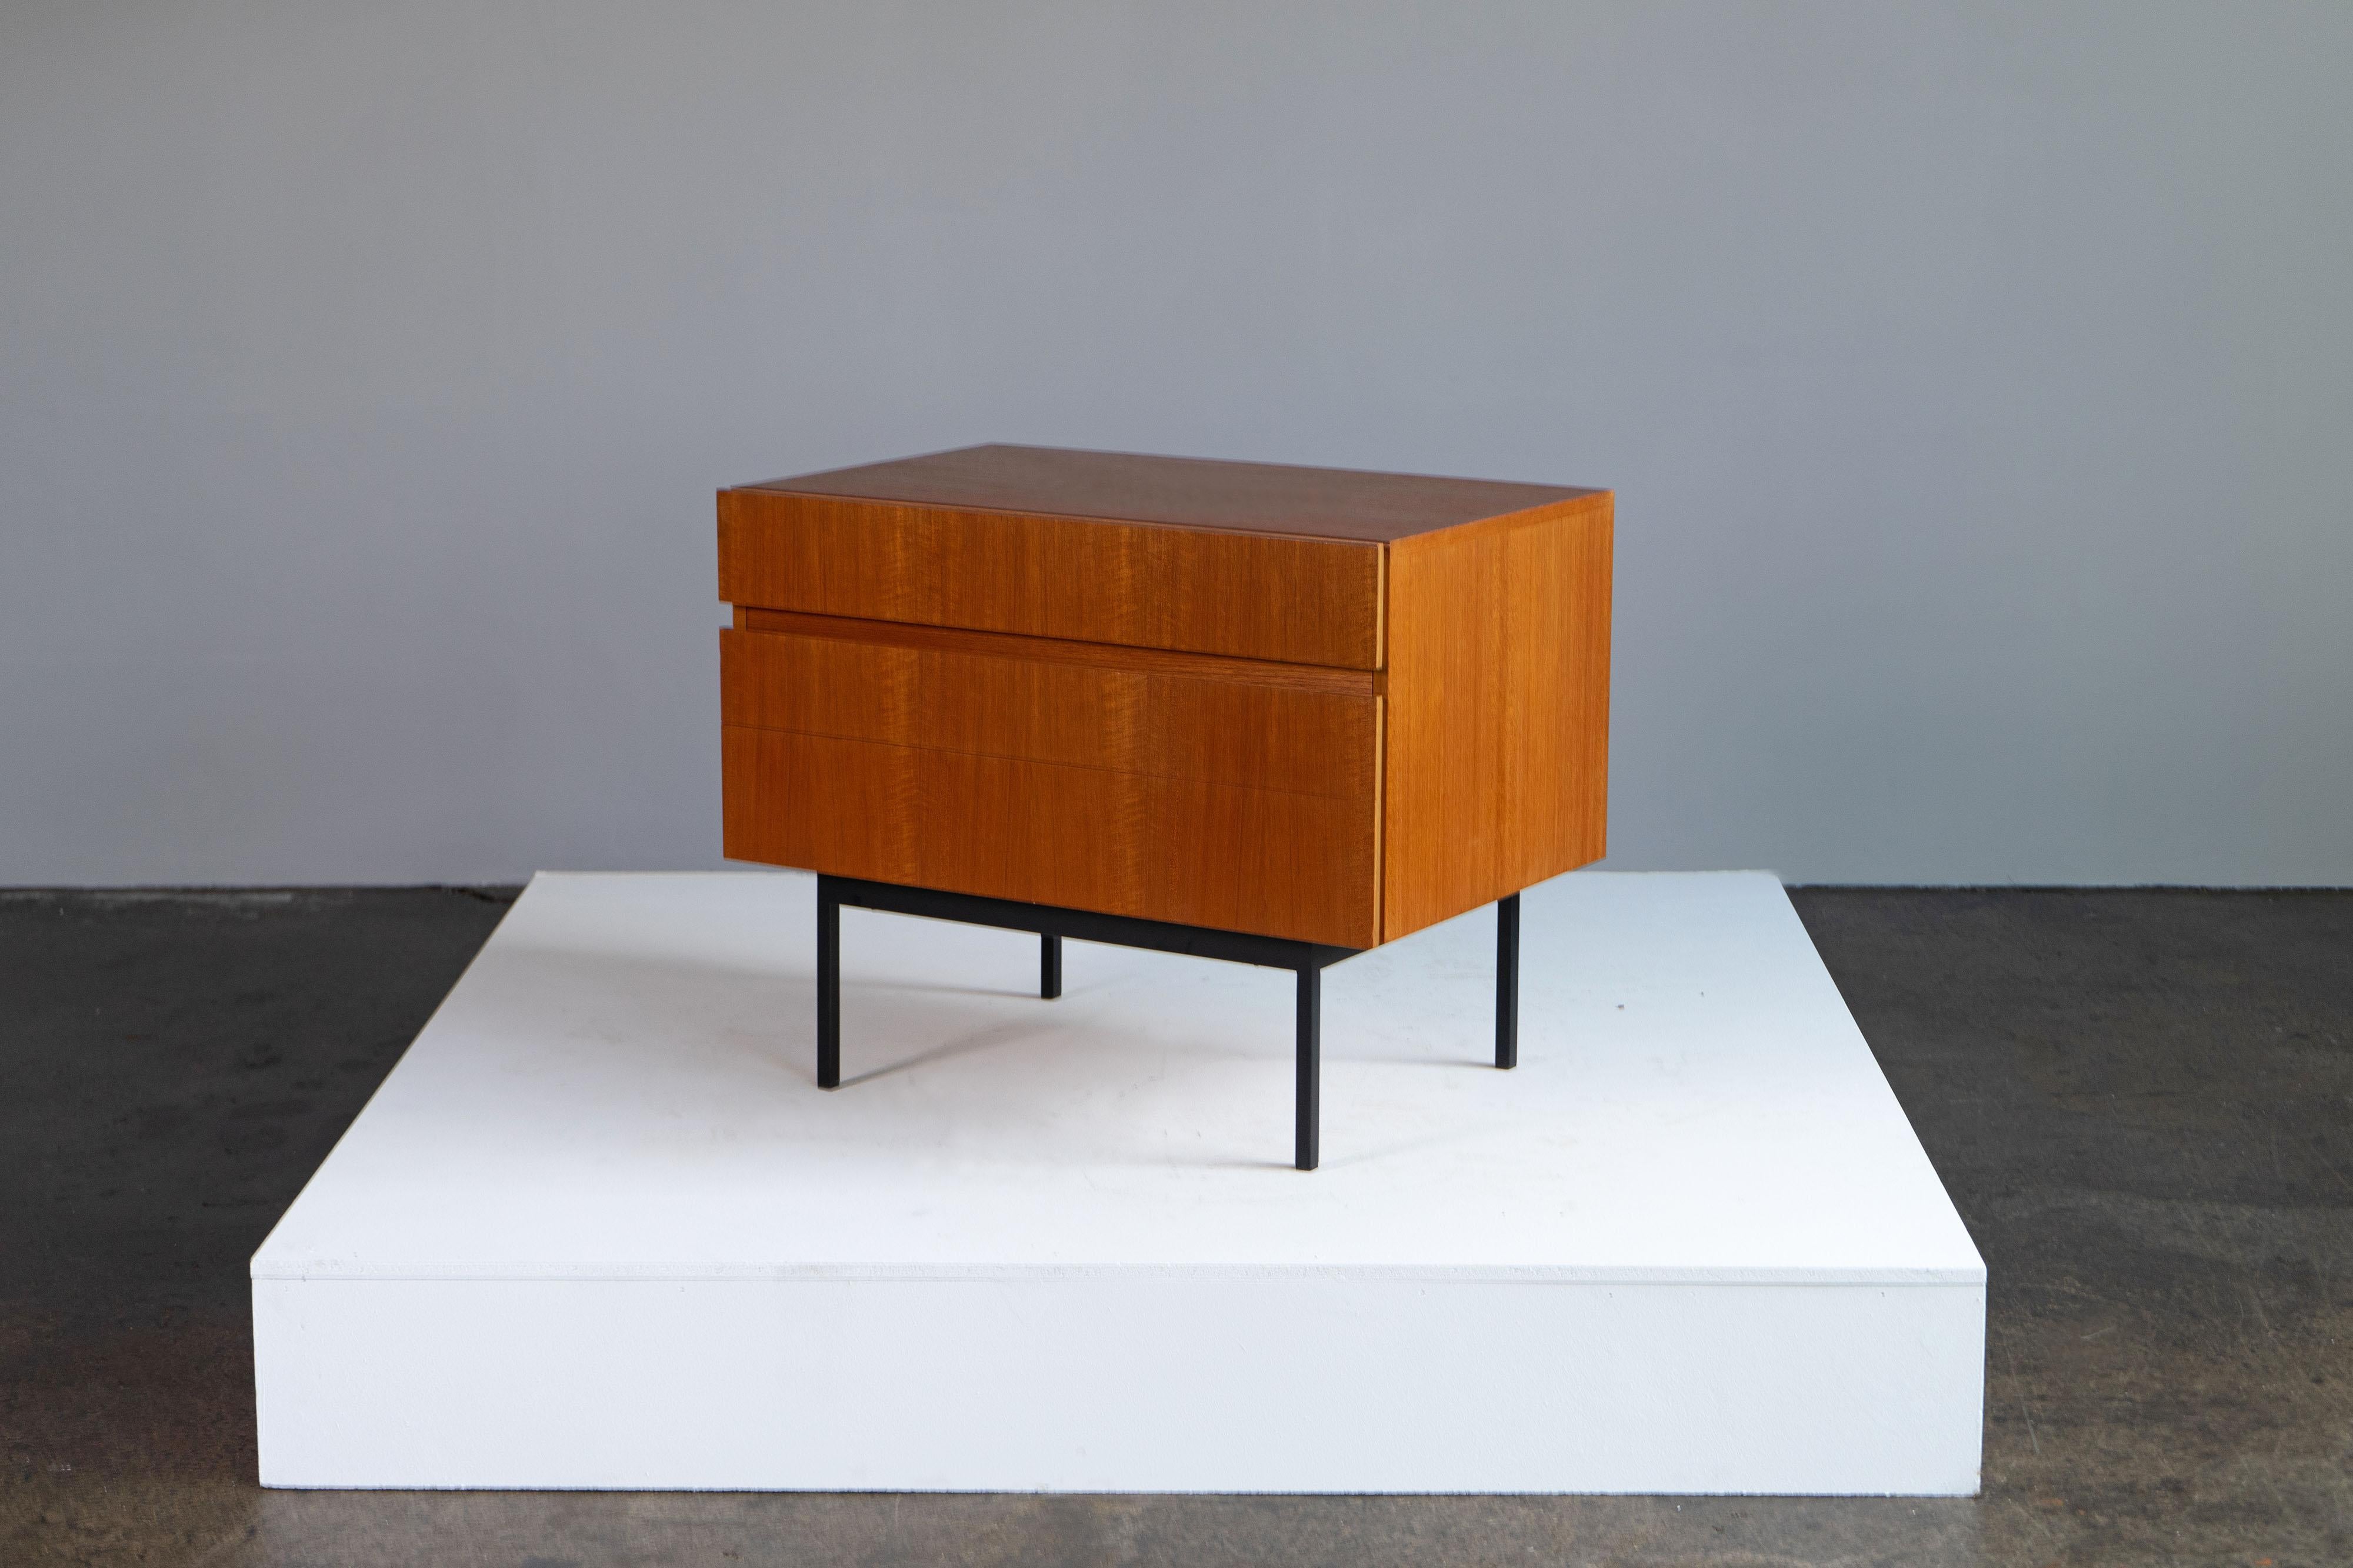 Rare chest of drawers by Dieter Waeckerlin, produced by Behr, Germany. A classic piece of the late 1950s - made with teak veneer.